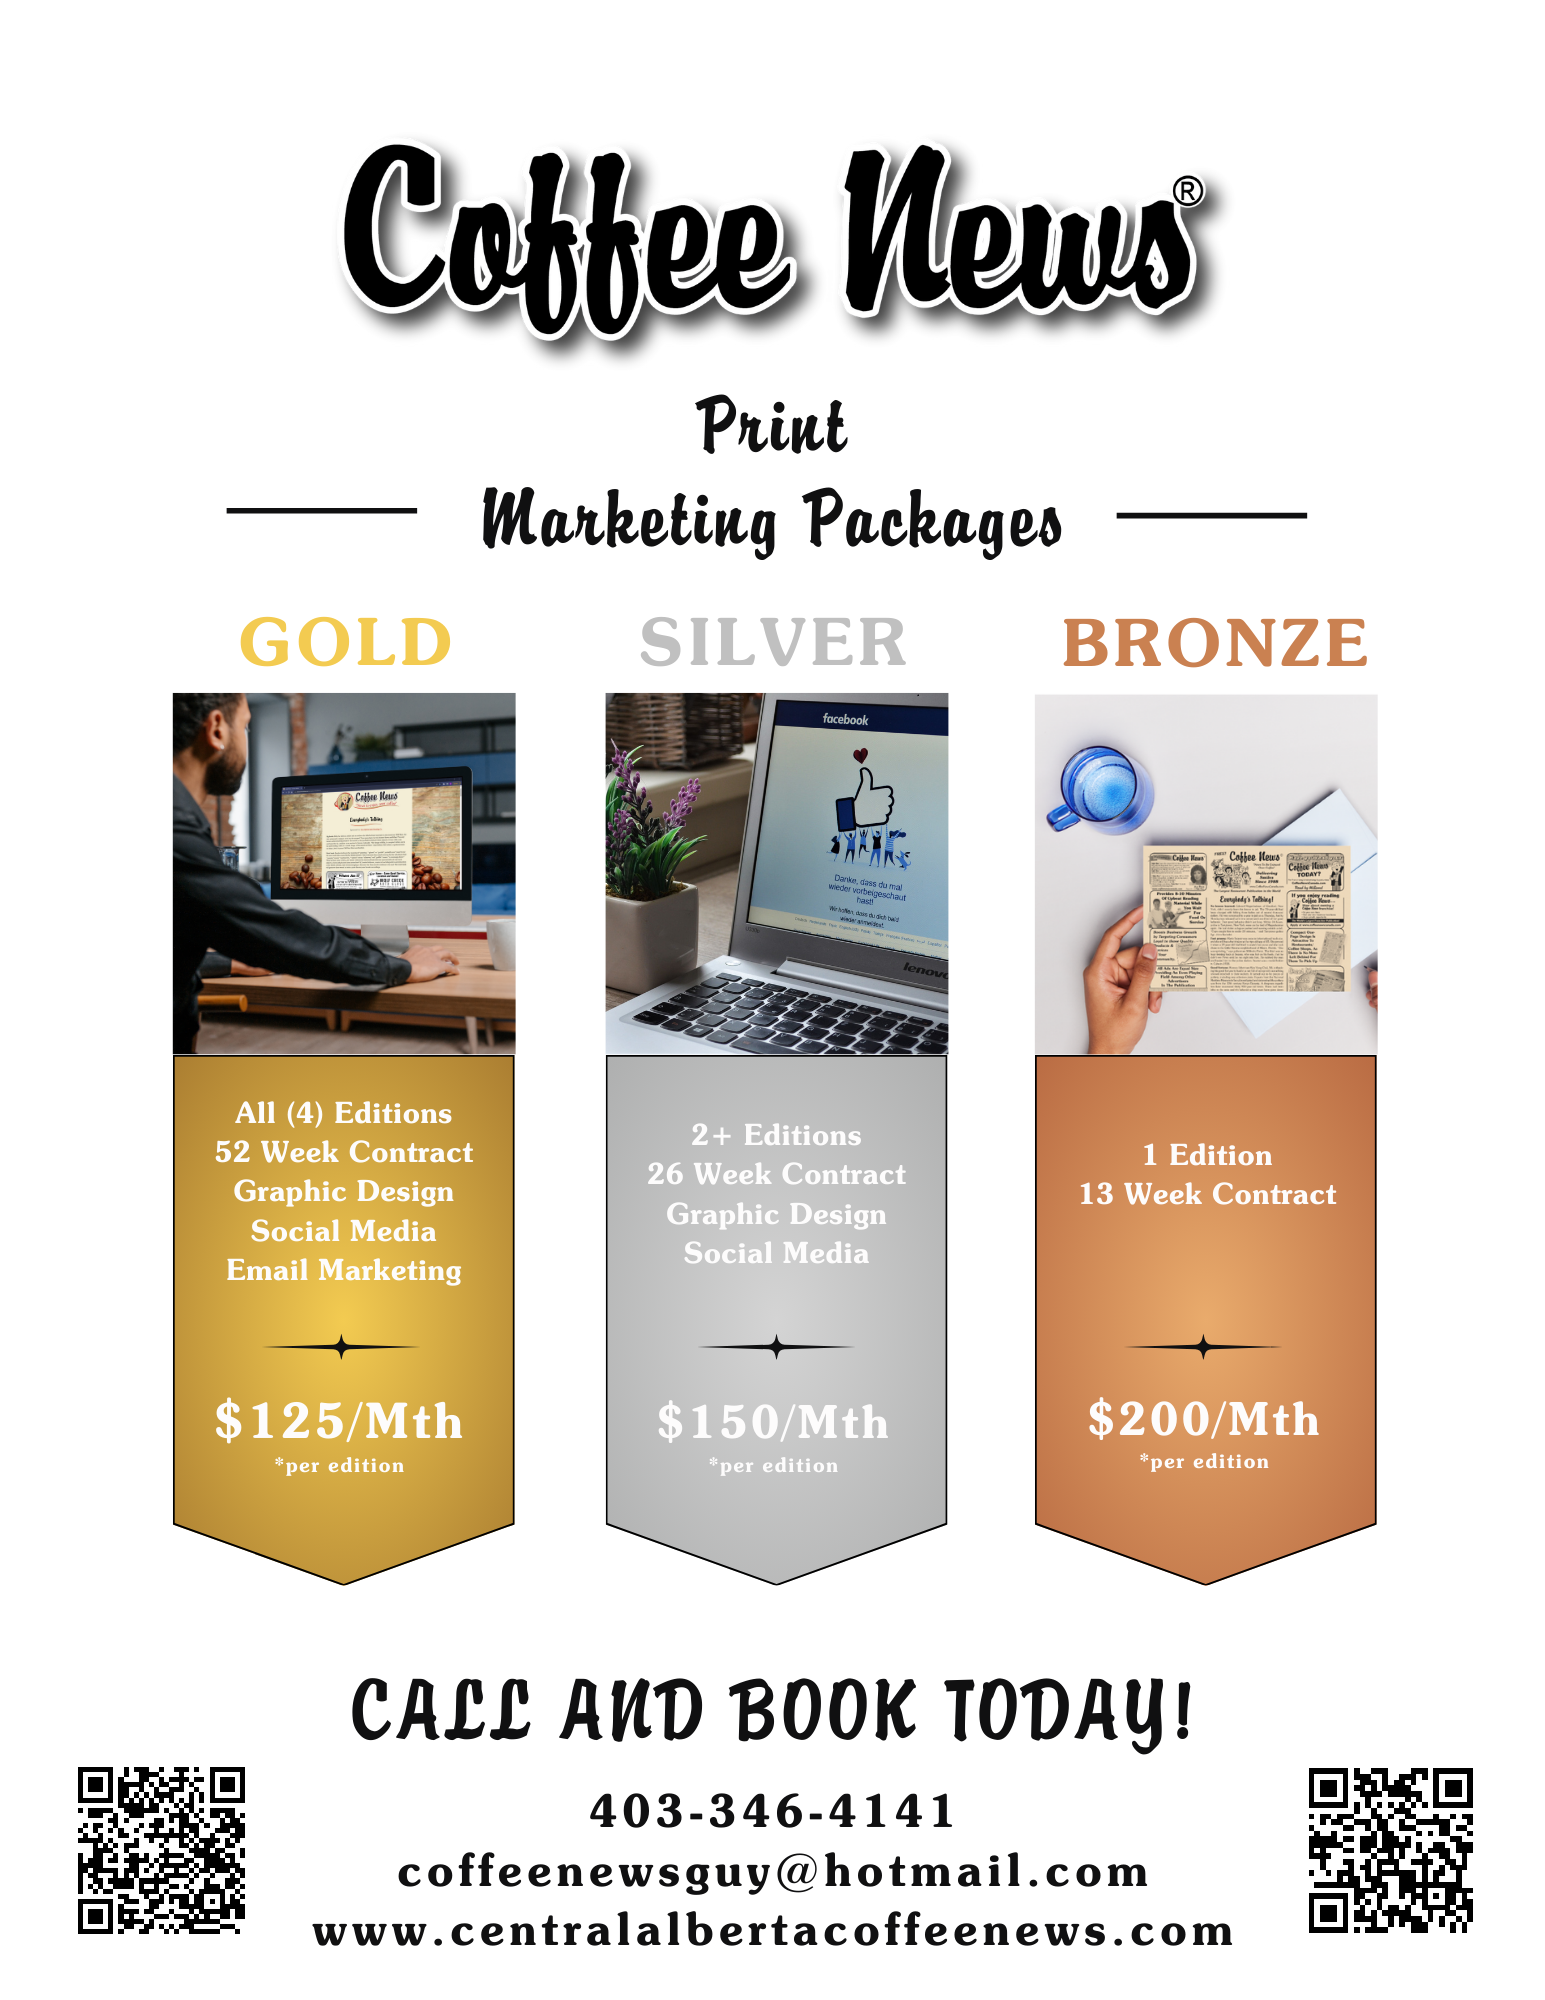 Gold Silver Bronze Marketing Packages with Central Alberta Coffee News. Call today 403-346-4141